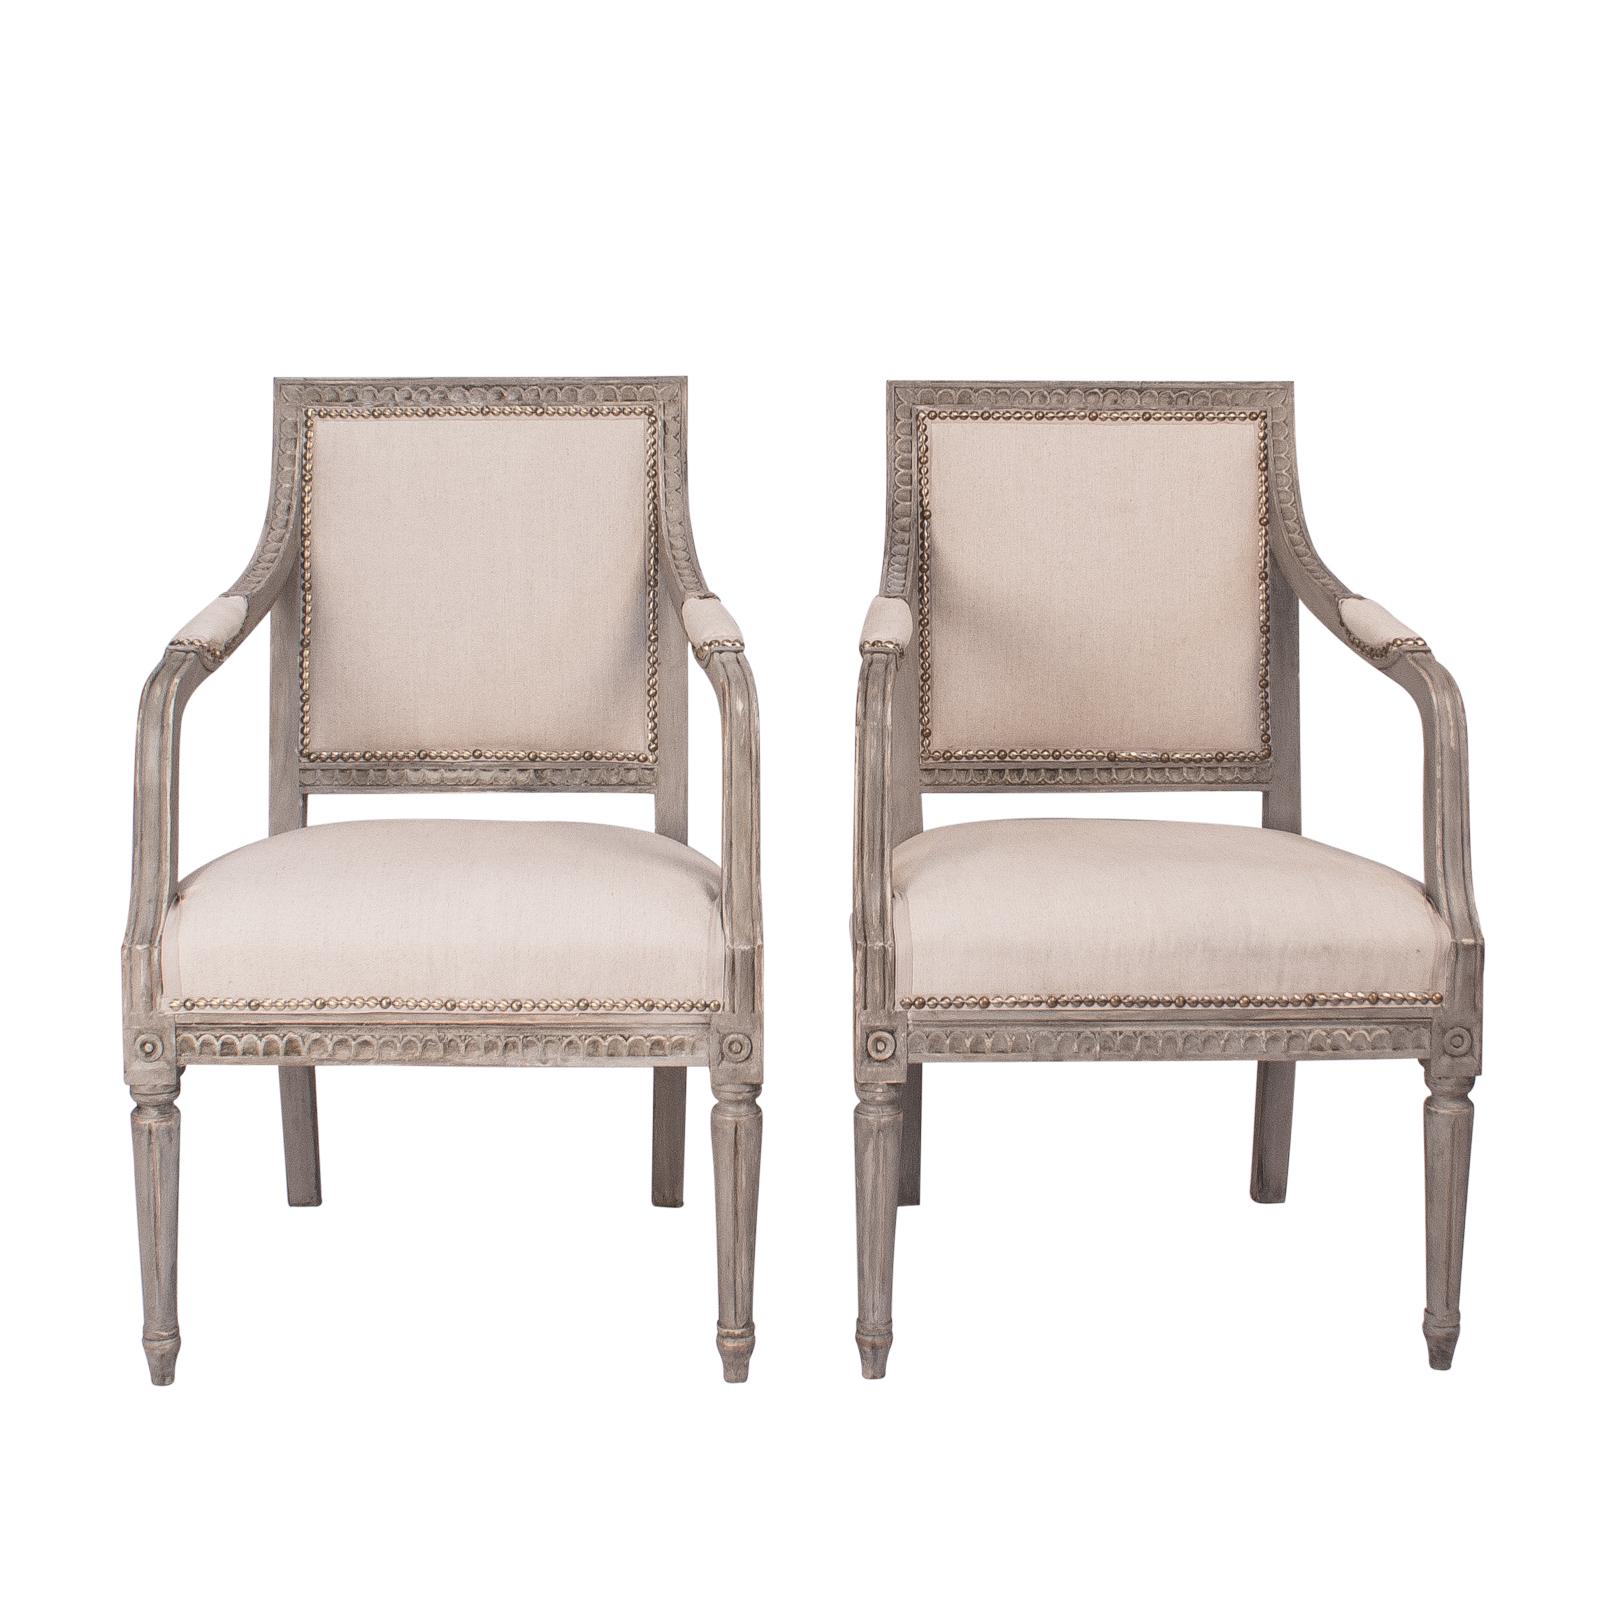 Pair of Gustavian Style Armchairs, Sweden, circa 1890